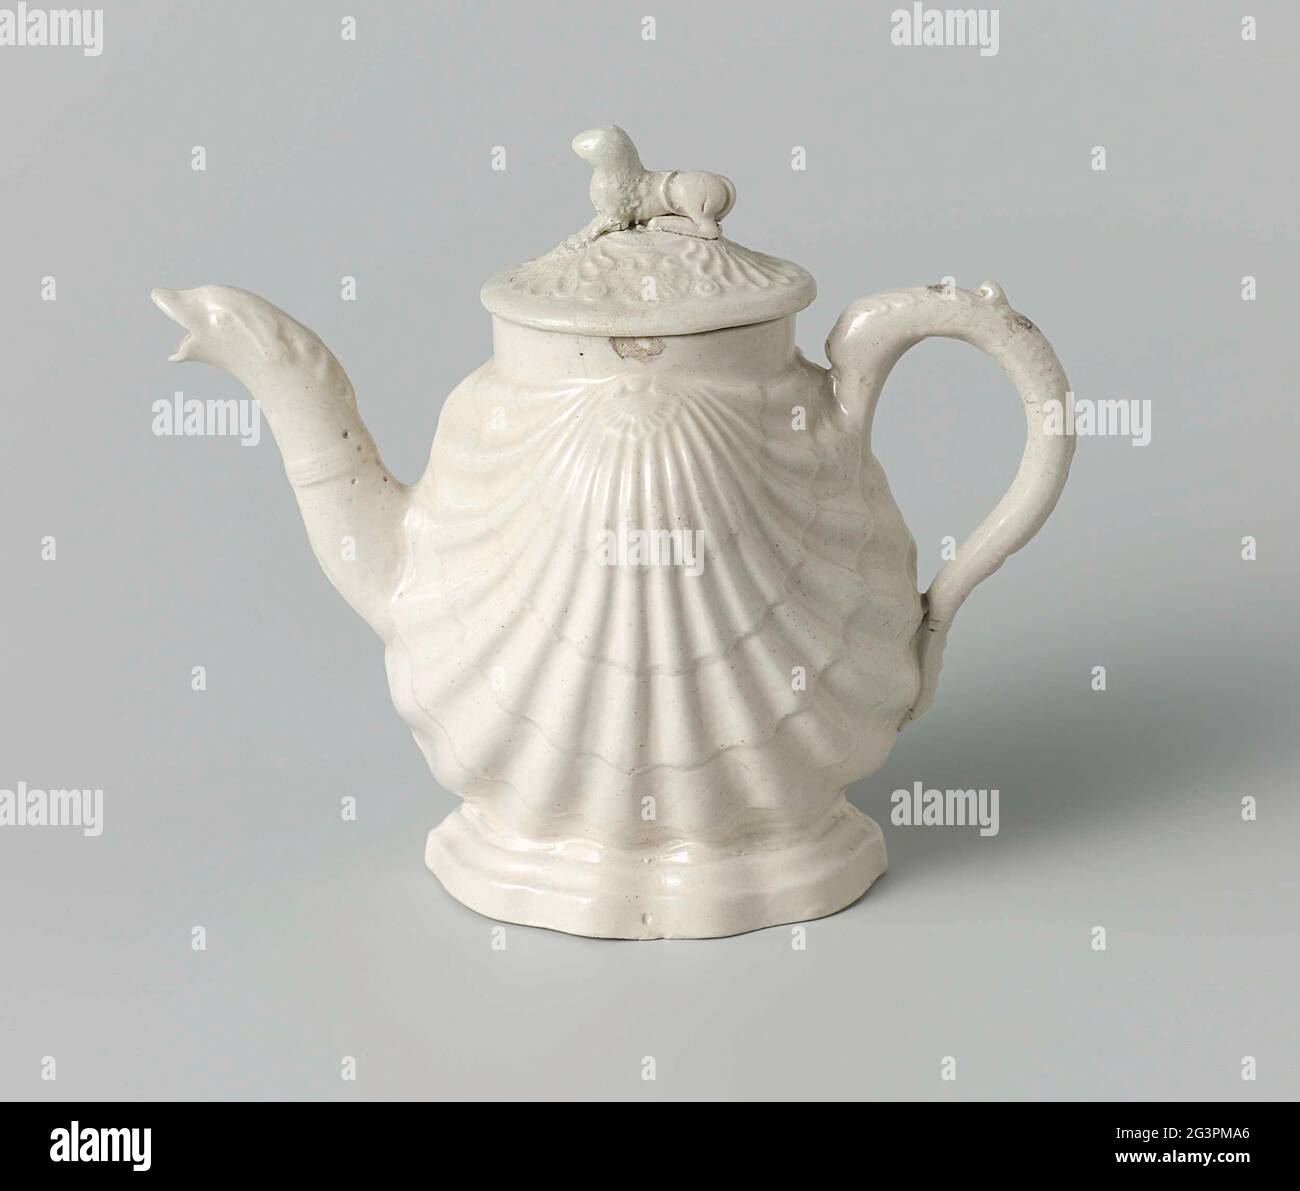 Teapot of white stoneware with salt glaze; Whellow ware. Teapot of white stoneware with salt glaze. The stomach of the pot has the shape of a double shell. The spout is bent and has the head of a fish as a mouth. The ear is C-shaped and has the shape of a dolphin. The lid has a lying dog or lion as a button. Stock Photo